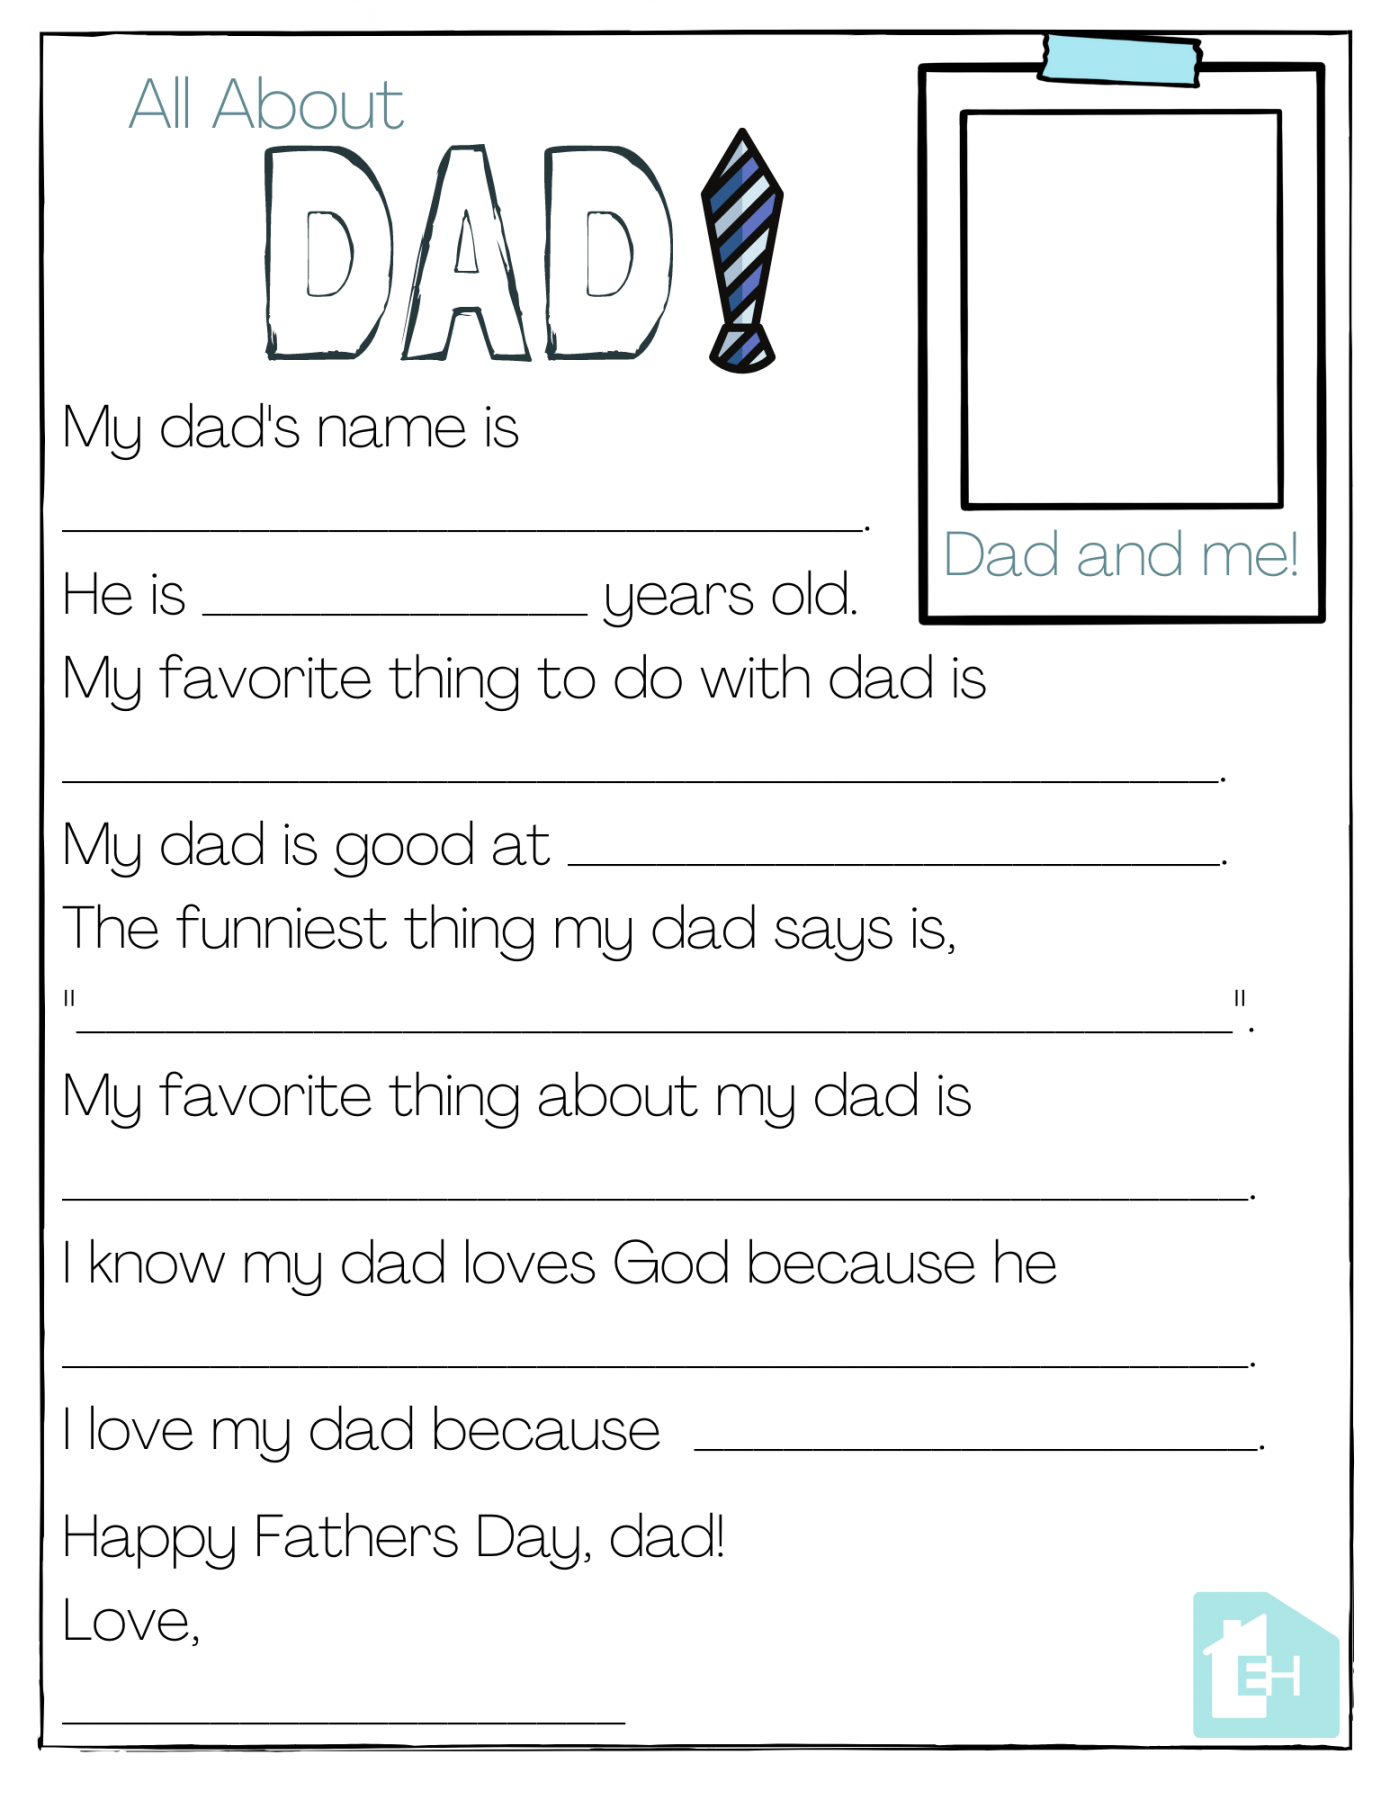 All About My Dad Free Printable - Printable - About My Dad Free Printable - Empowered Homes